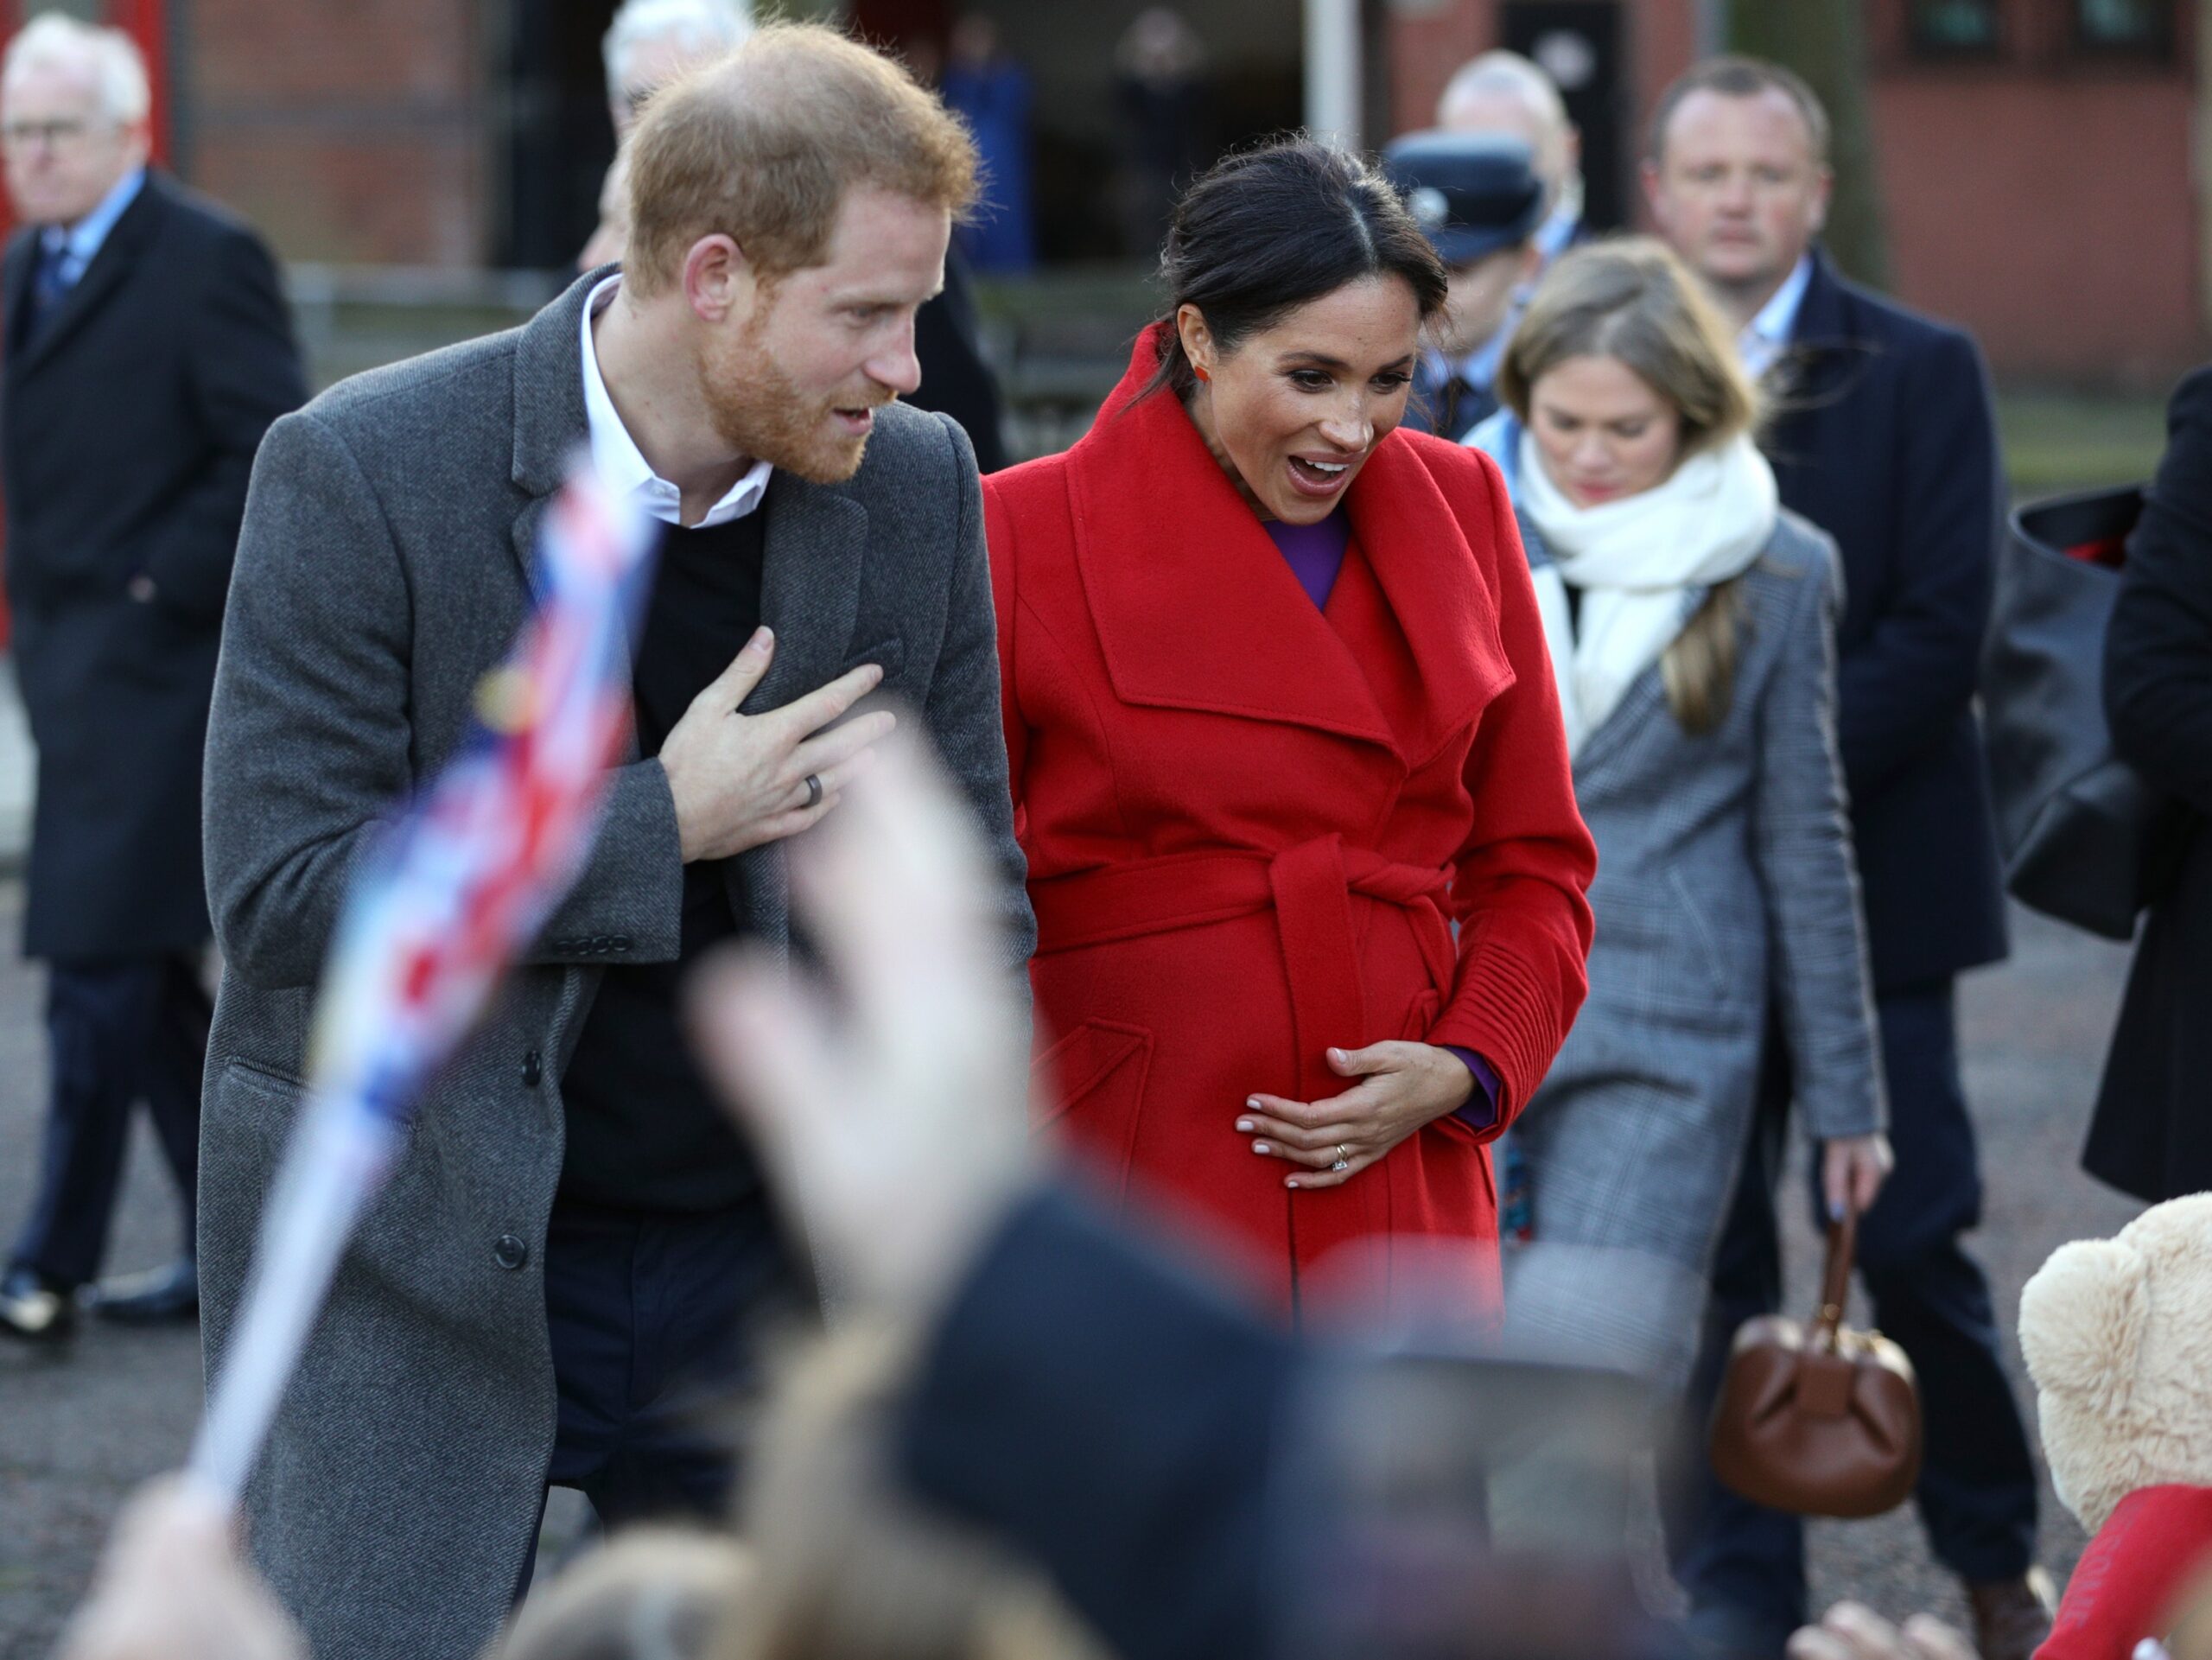 Prince Harry and Meghan Markle have welcomed a baby boy